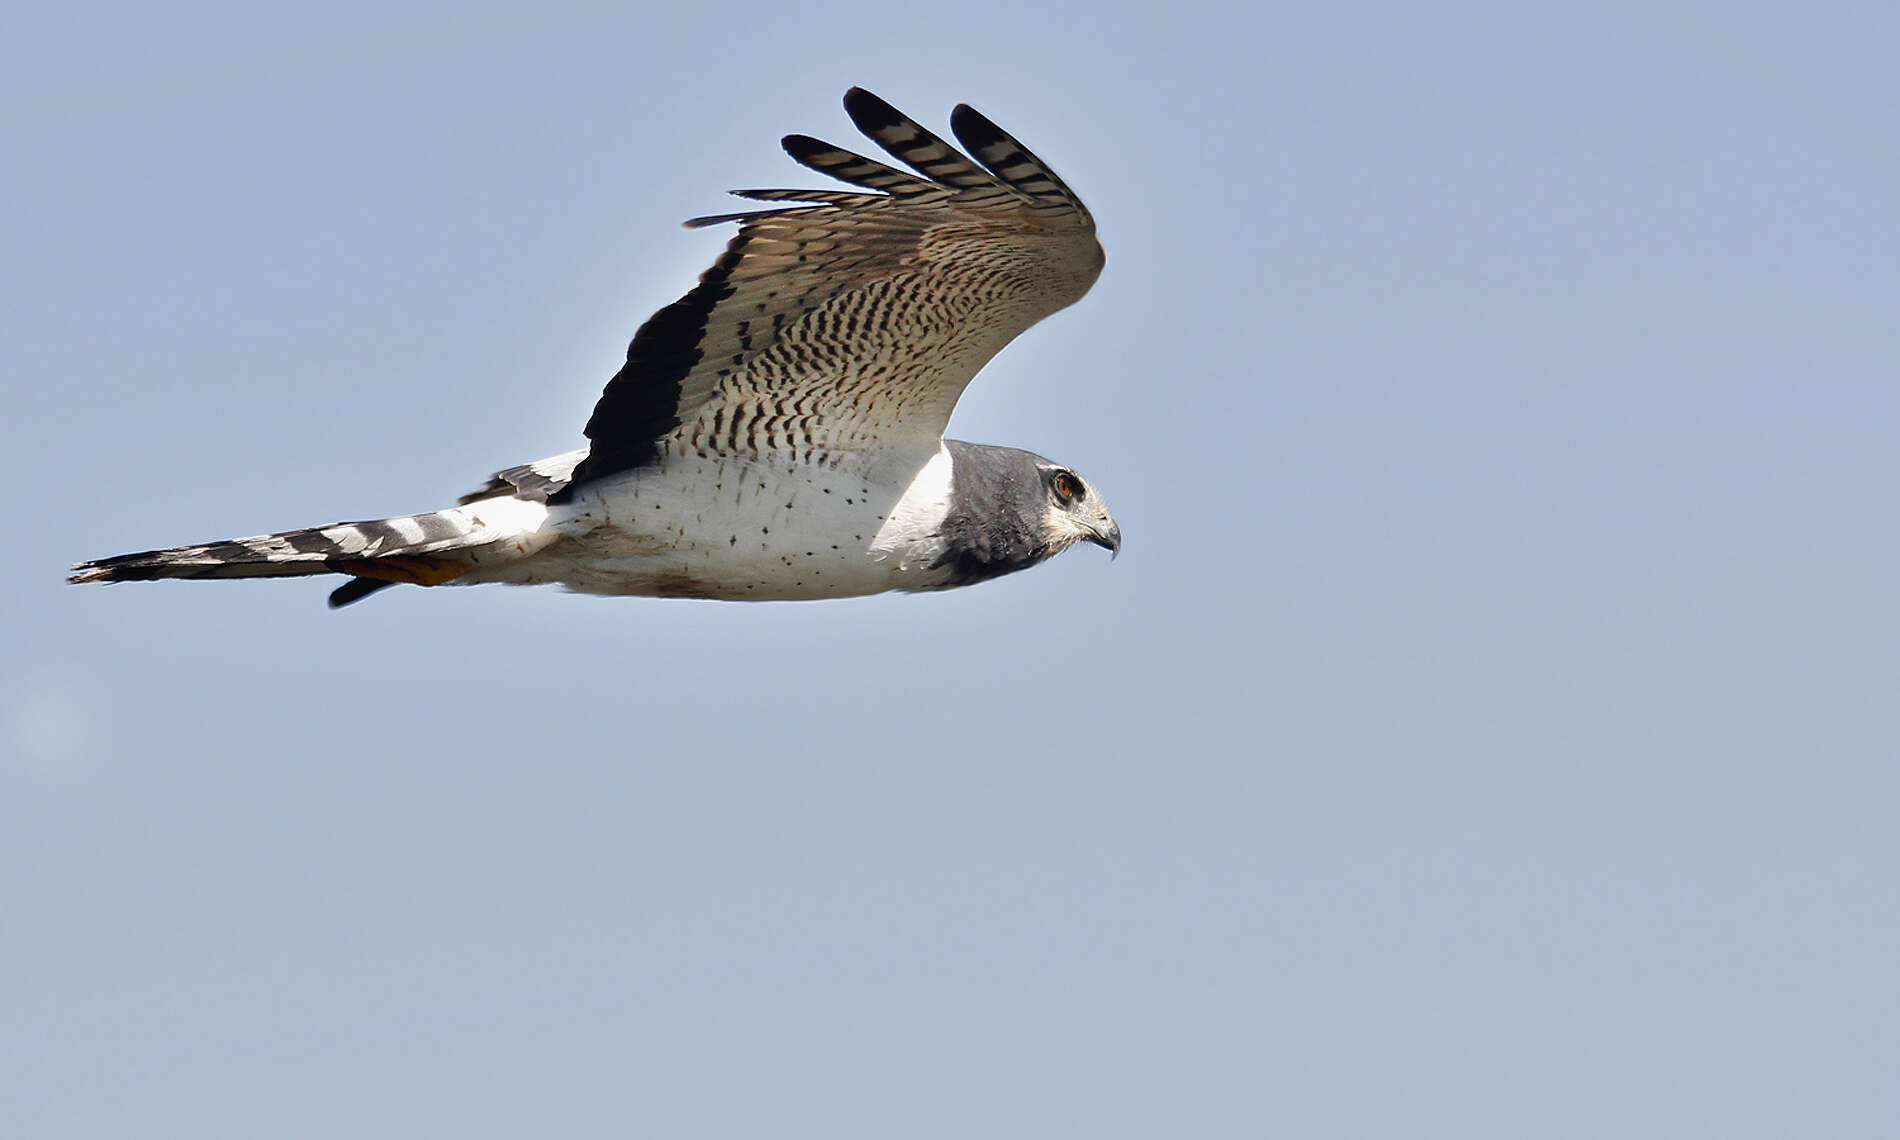 Image of Long-winged Harrier